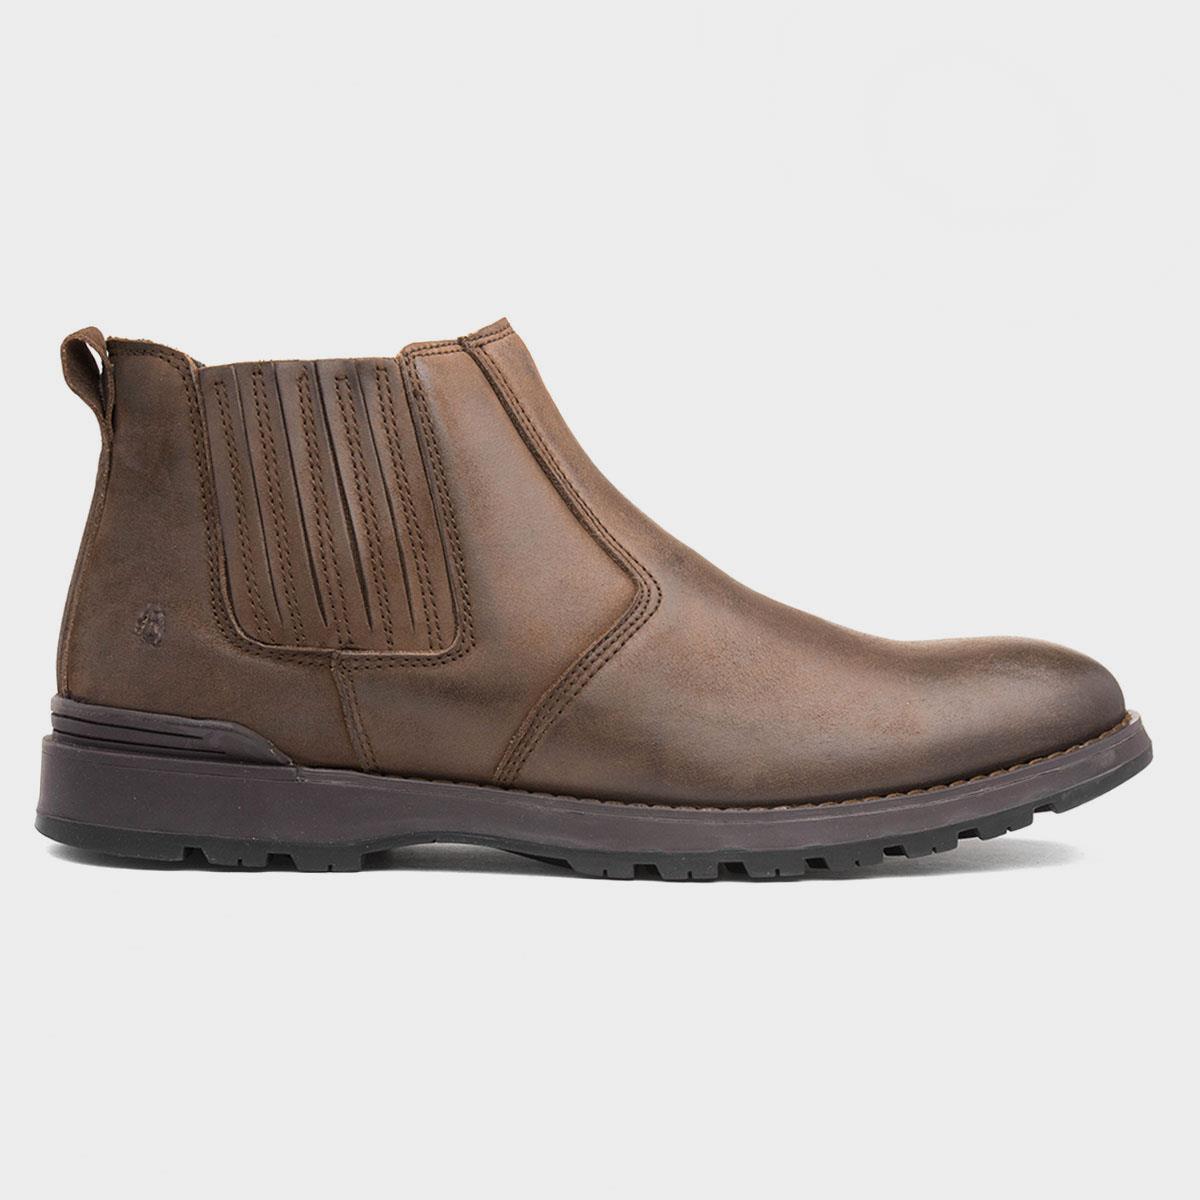 Hush Puppies Gary Mens Brown Leather Chelsea Boots-589107 | Shoe Zone